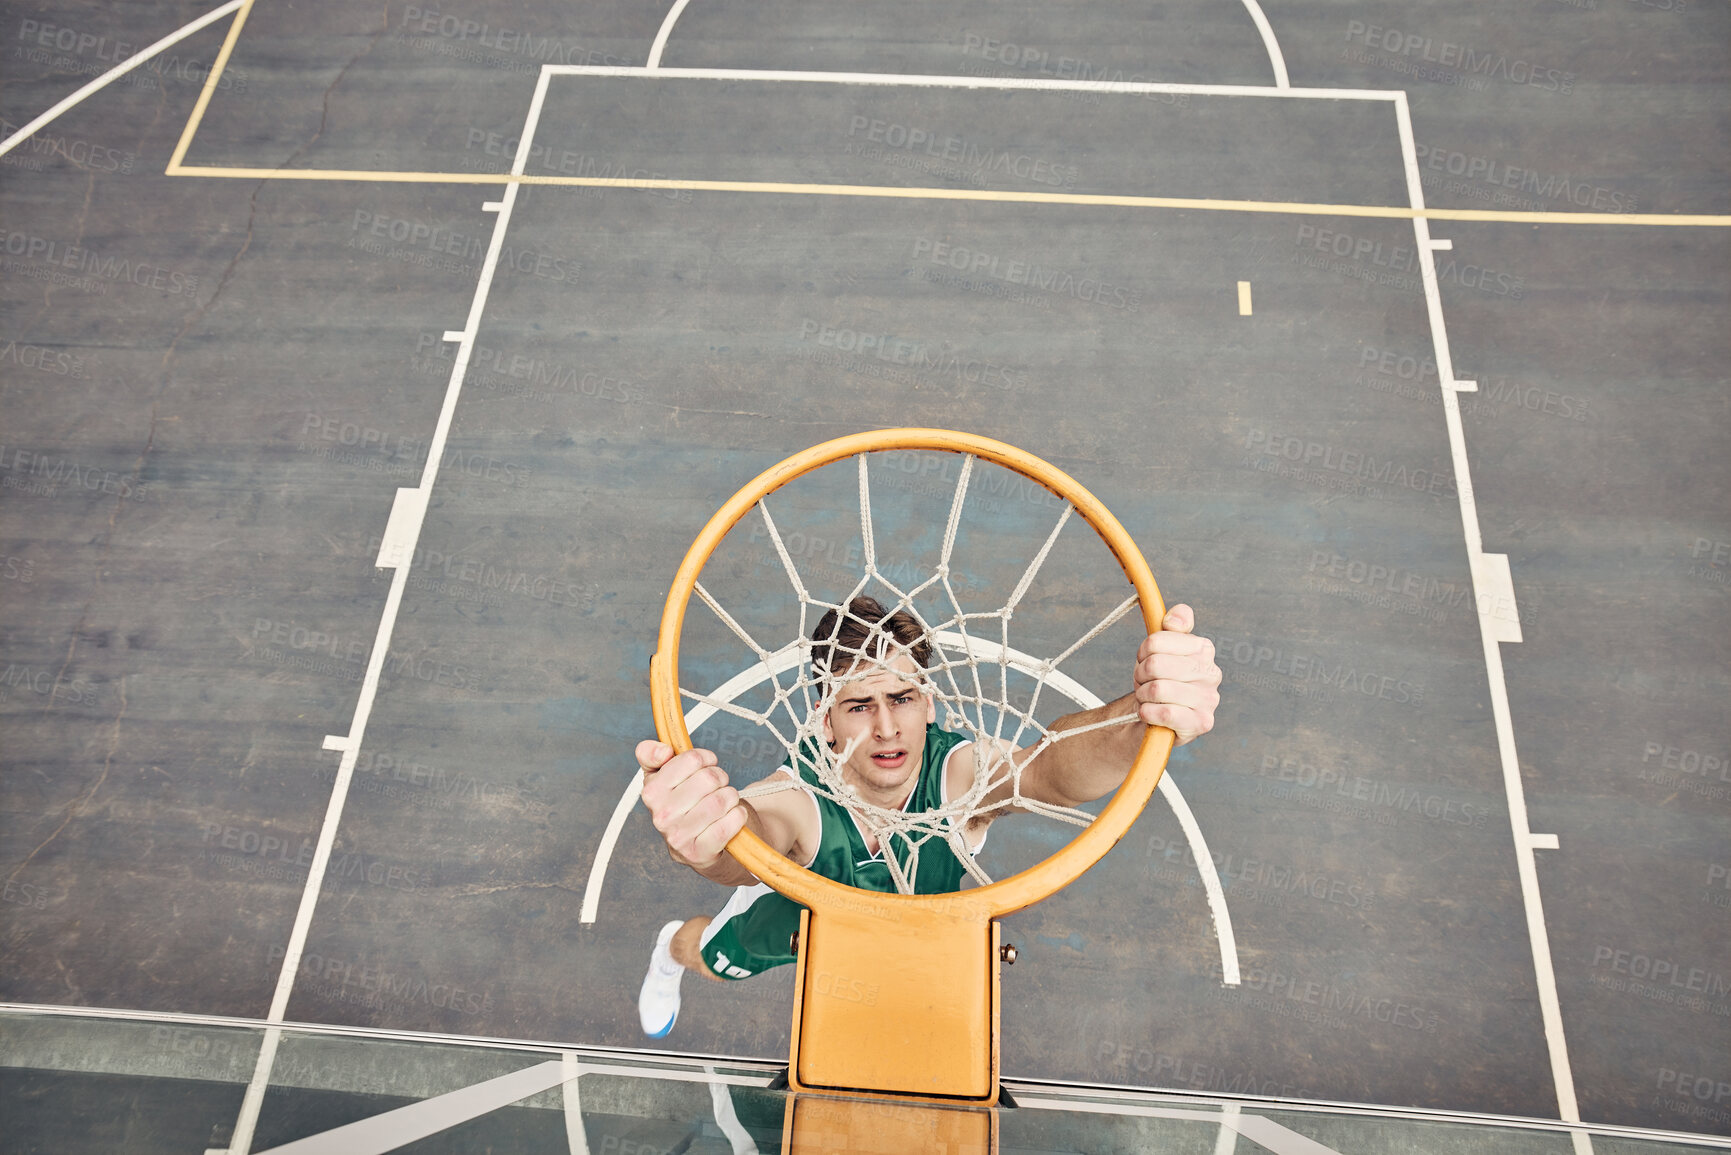 Buy stock photo Portrait of basketball player hanging on net on a basketball court. Young man playing basketball outside doing slam dunk and jumping to score a point. Motivation to win and have fun in sports game